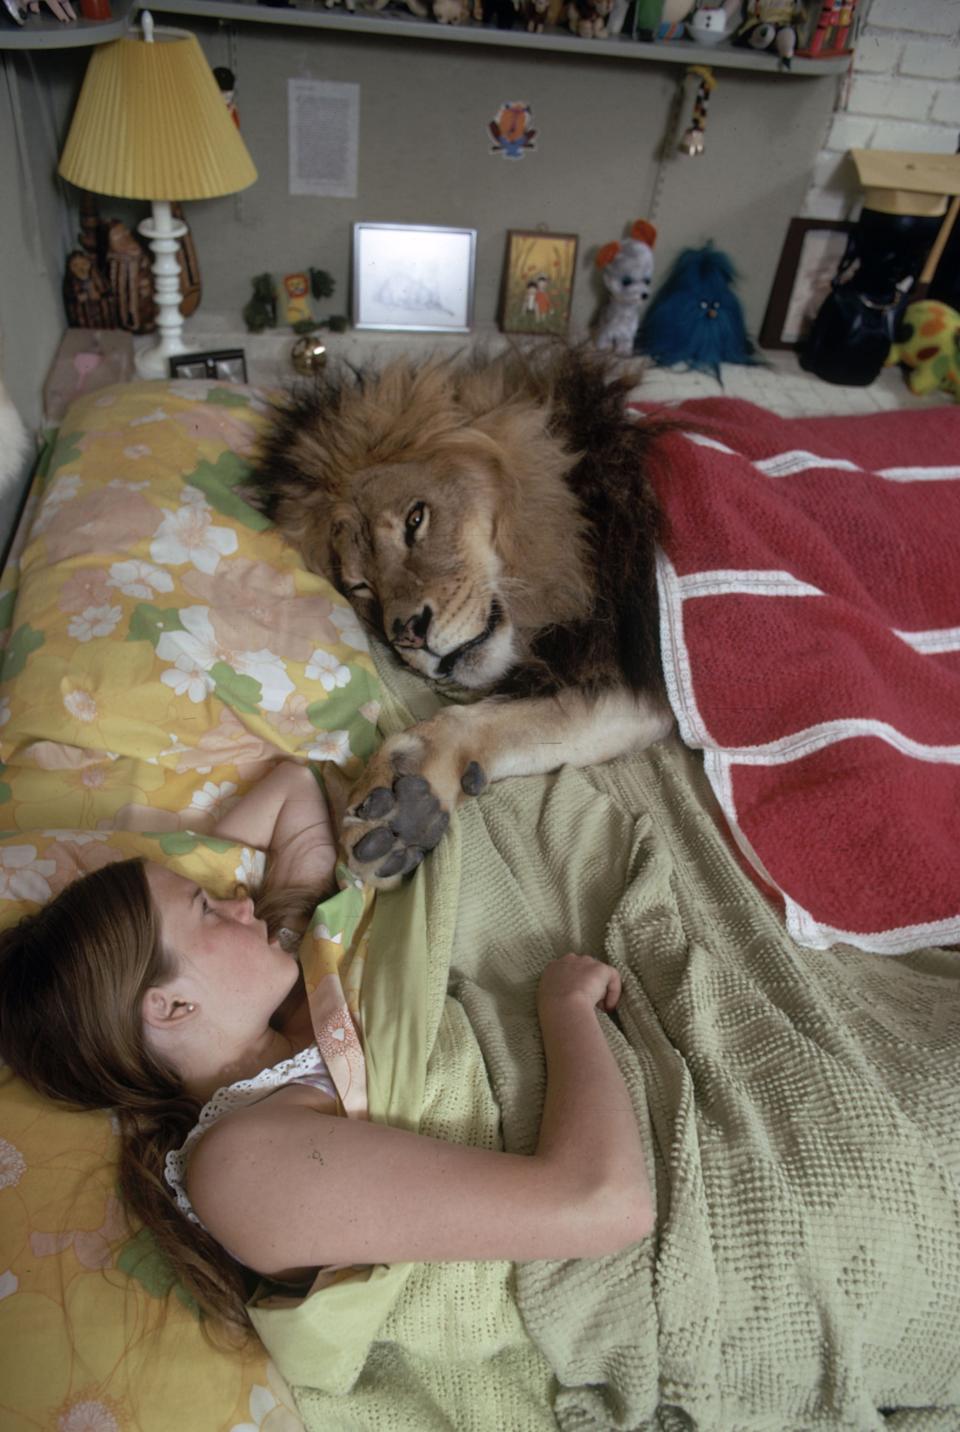 American future actress Melanie Griffith lies in bed beside her pet lion Neil, who lies under a blanket, Sherman Oaks, California, May 1971